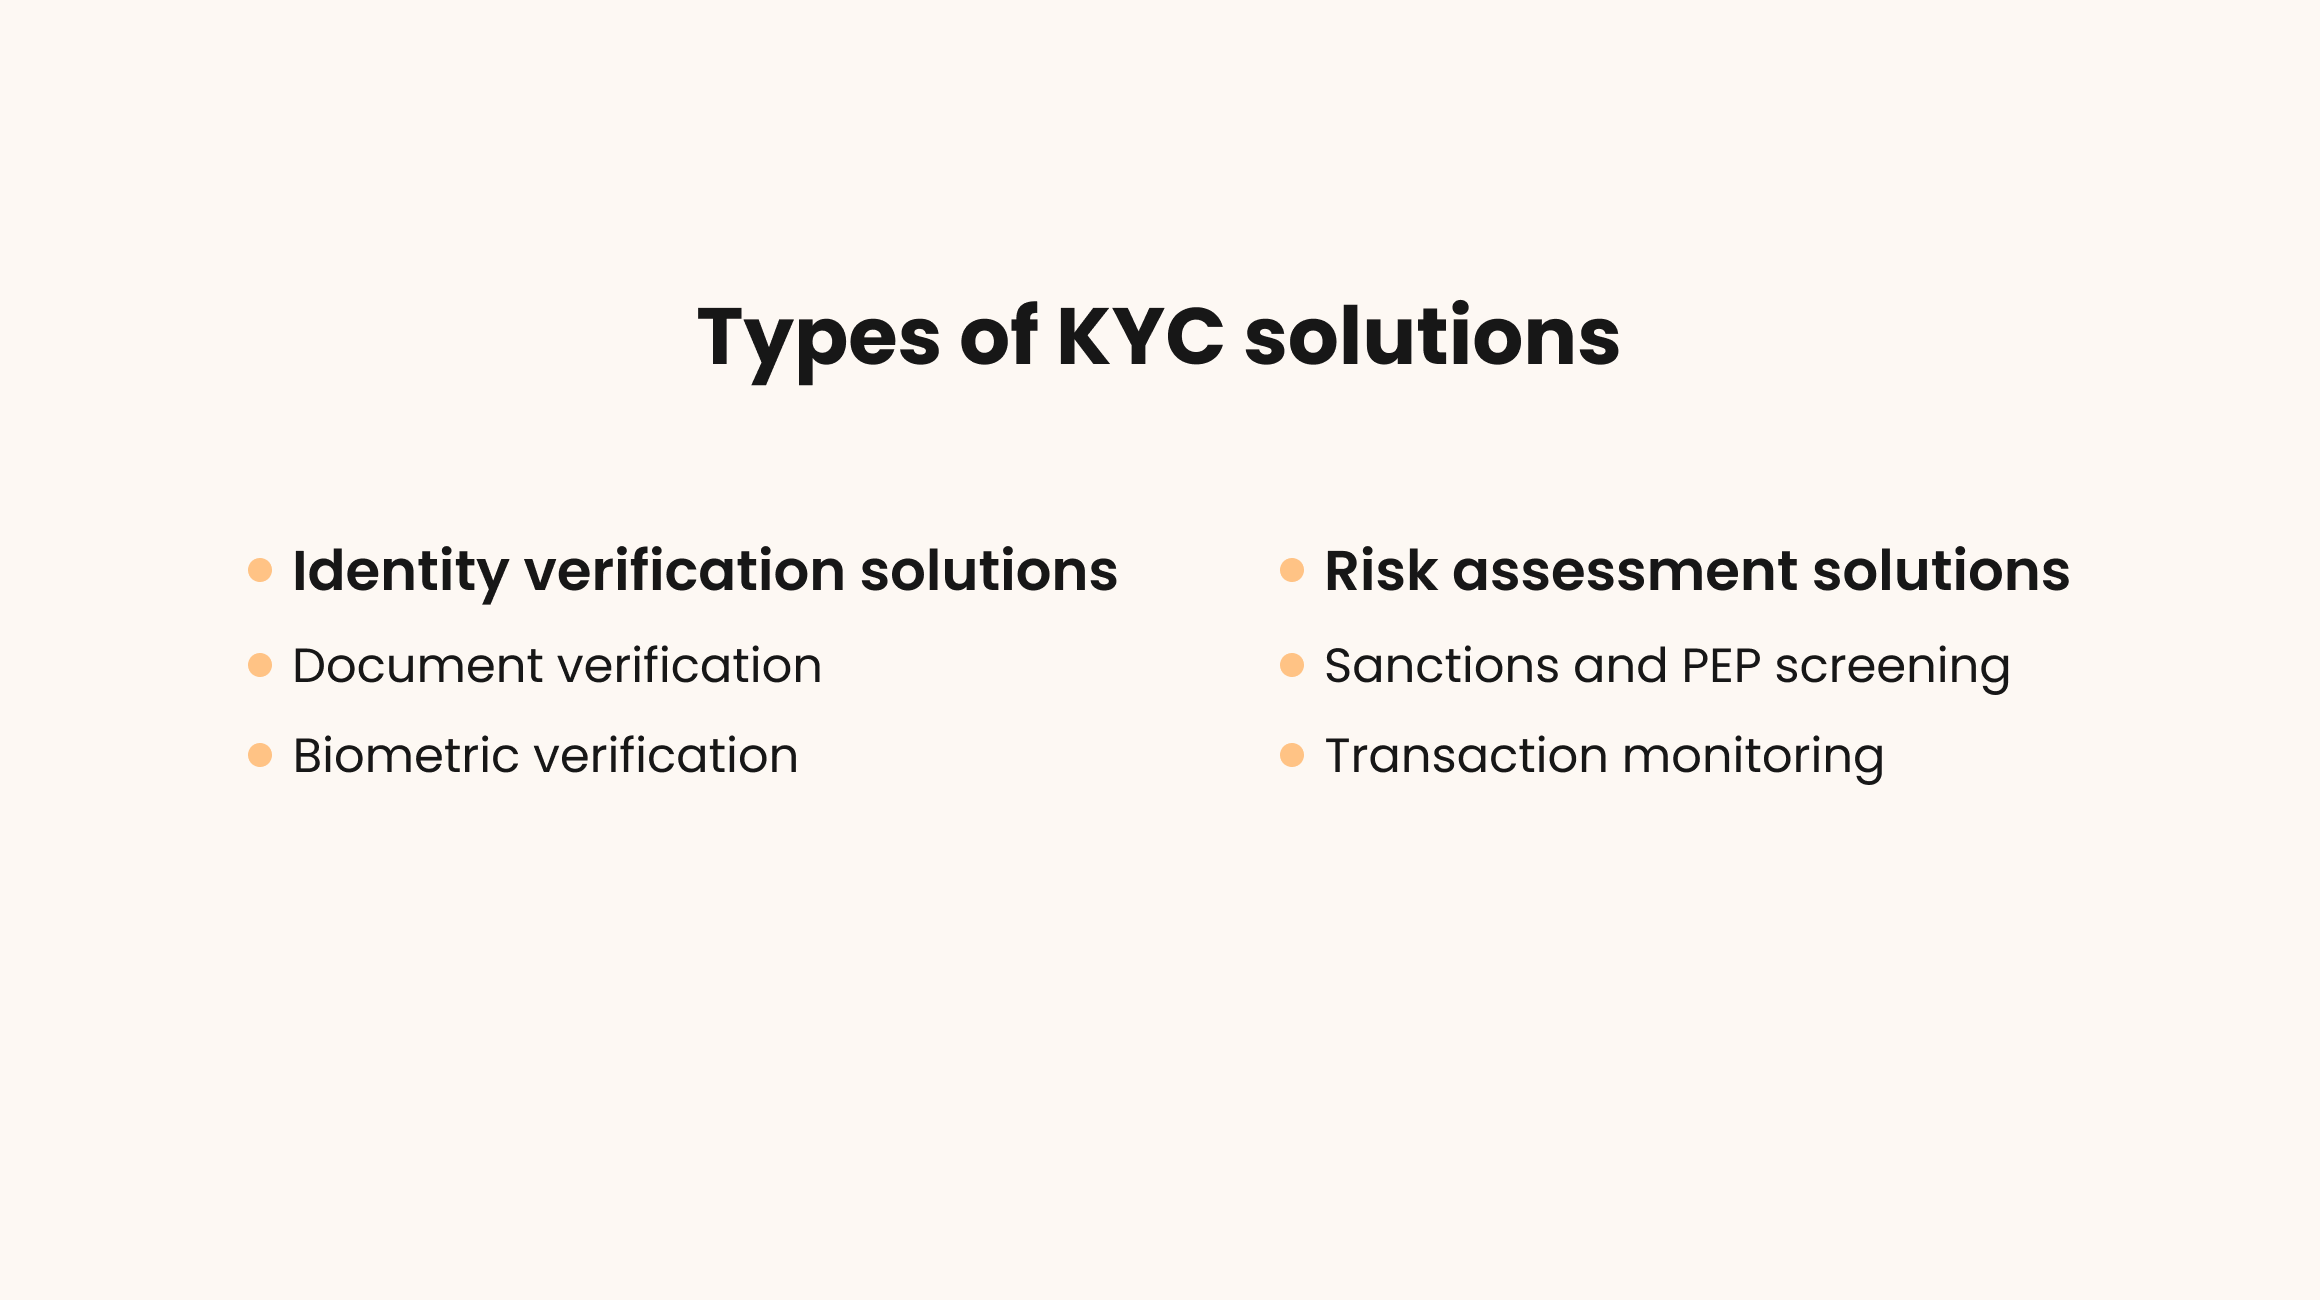 Types of KYC software solutions